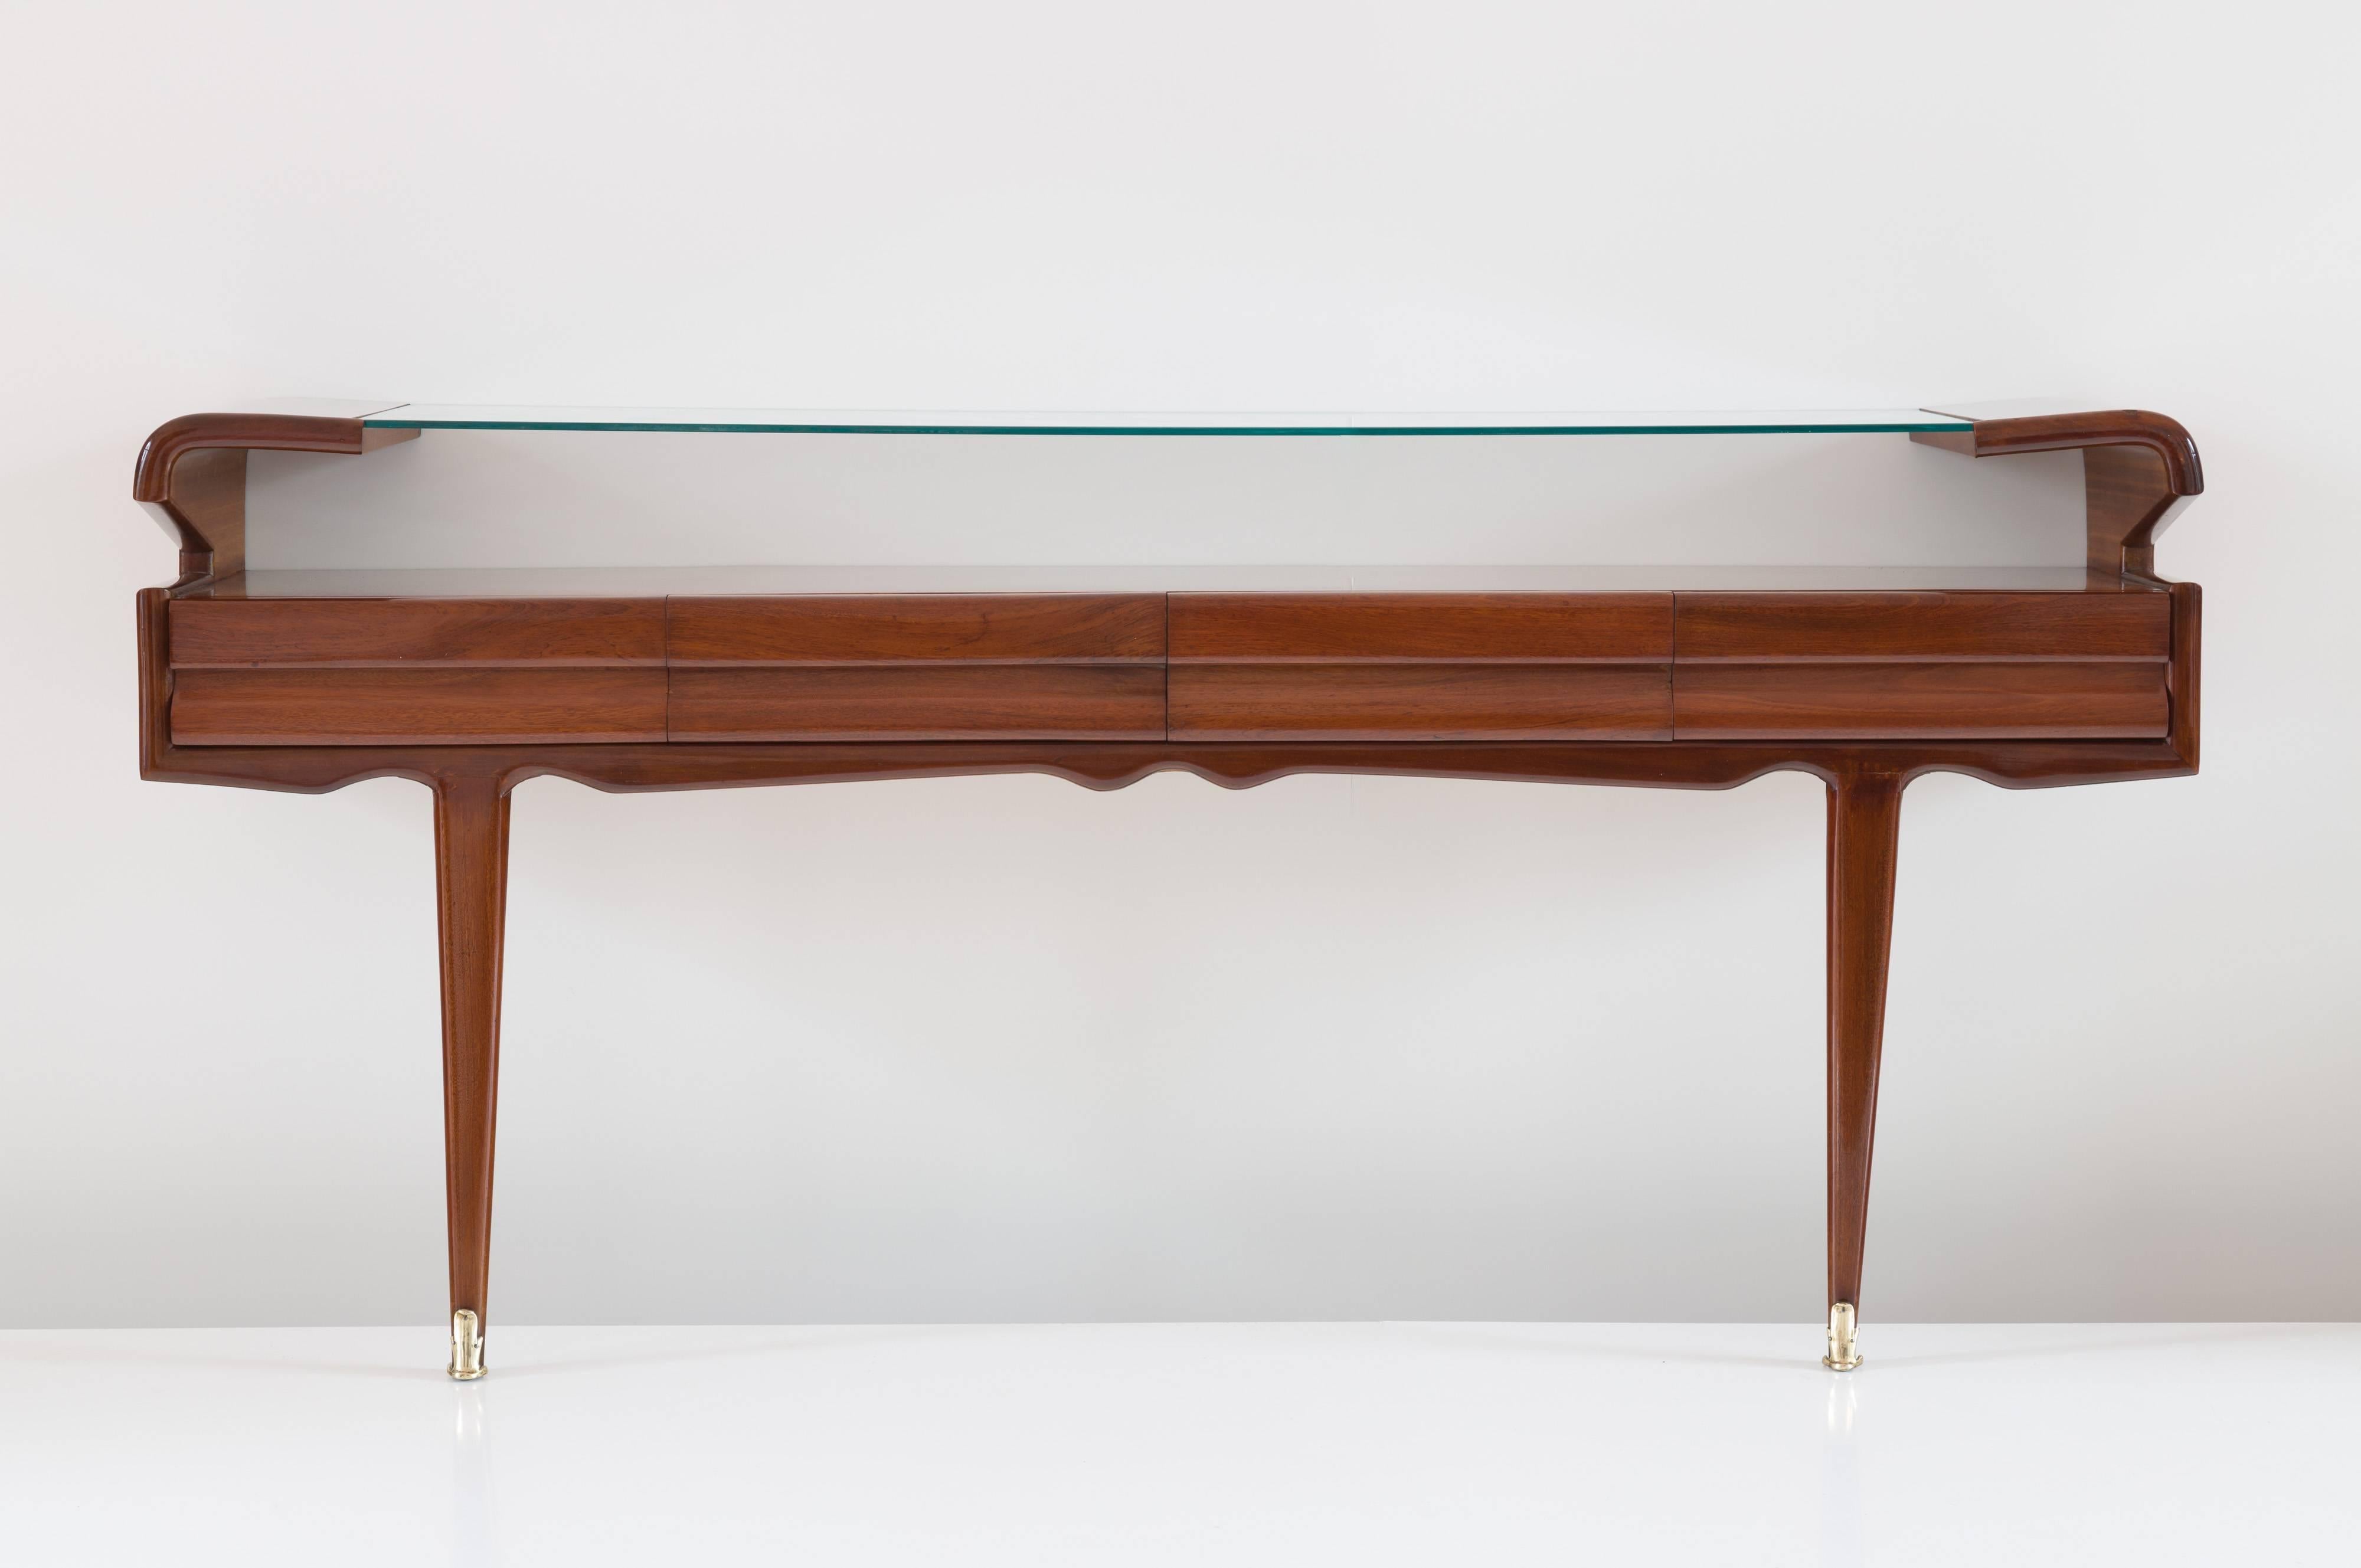 Elegant large console table by Dassi, circa 1950, 
rosewood veneer, glass top, four drawers, brass feet,
rare wood handles, 
perfect original condition.

Measures: H 90 cm, 190 x 40 cm.